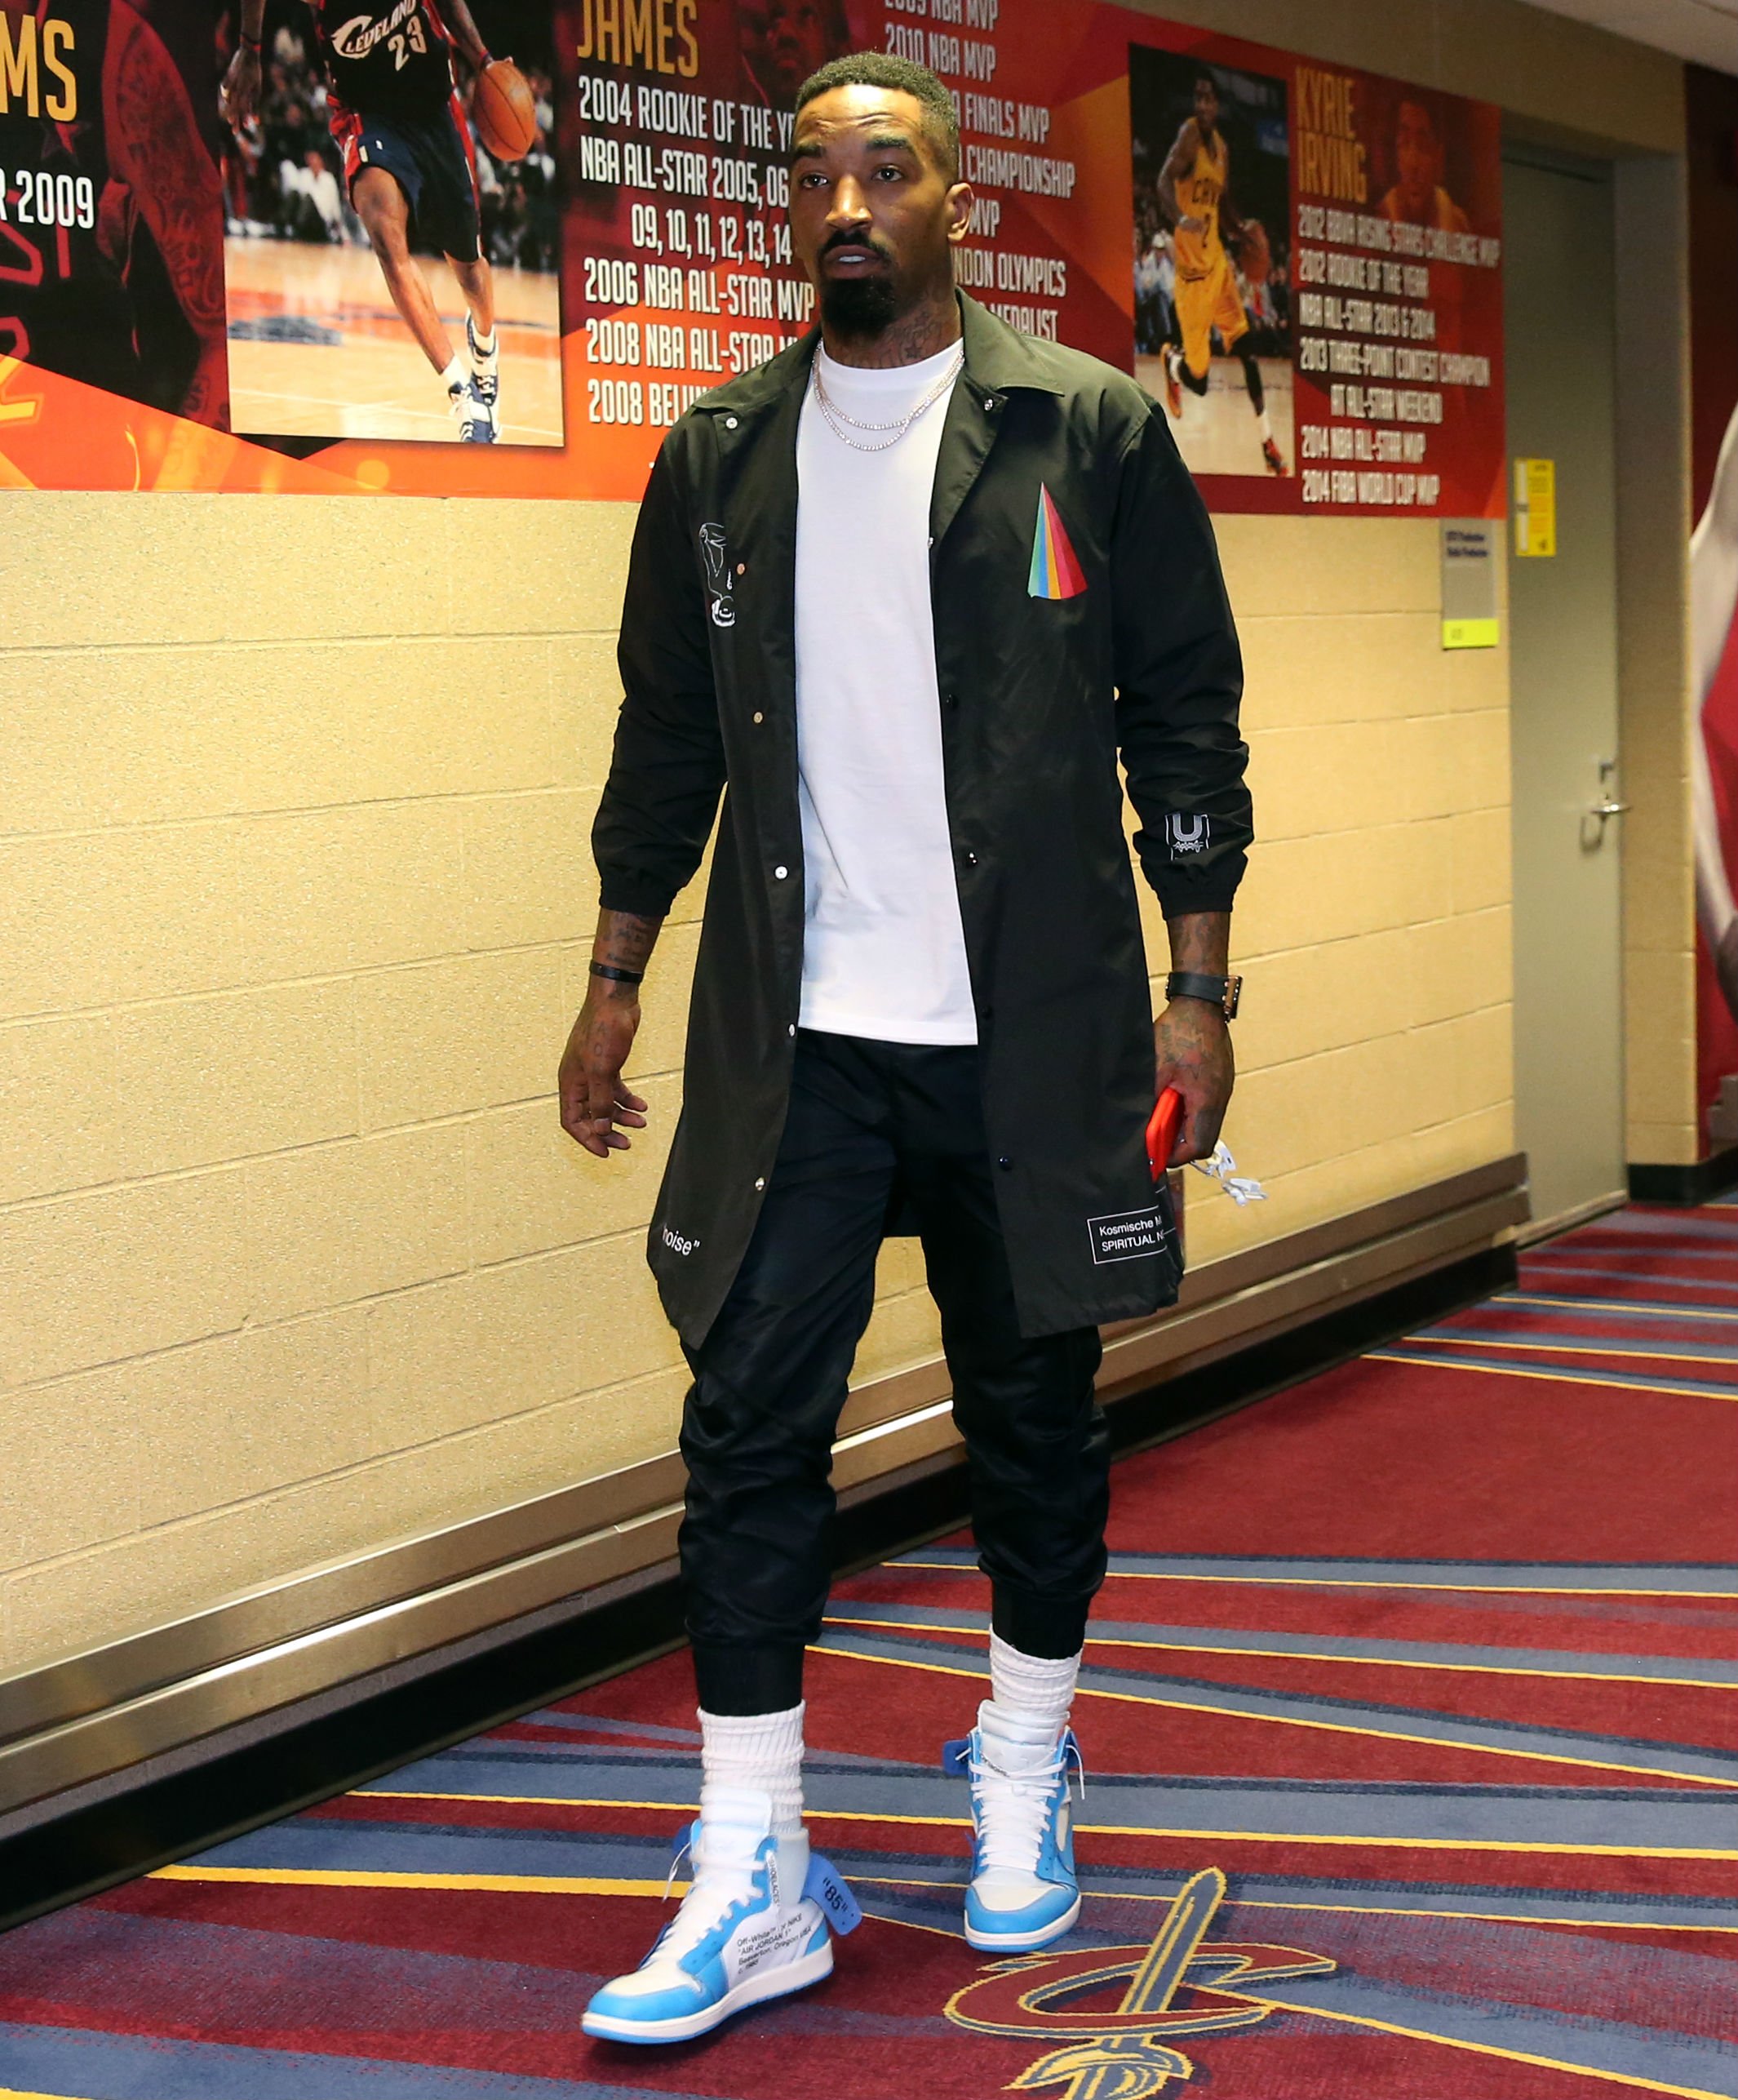 SoleCollector.com on Twitter: "#SoleWatch: @TheRealJRSmith arrives for Game 3 in the Off-White Air Jordan 1. https://t.co/patRQGxo0J" / Twitter